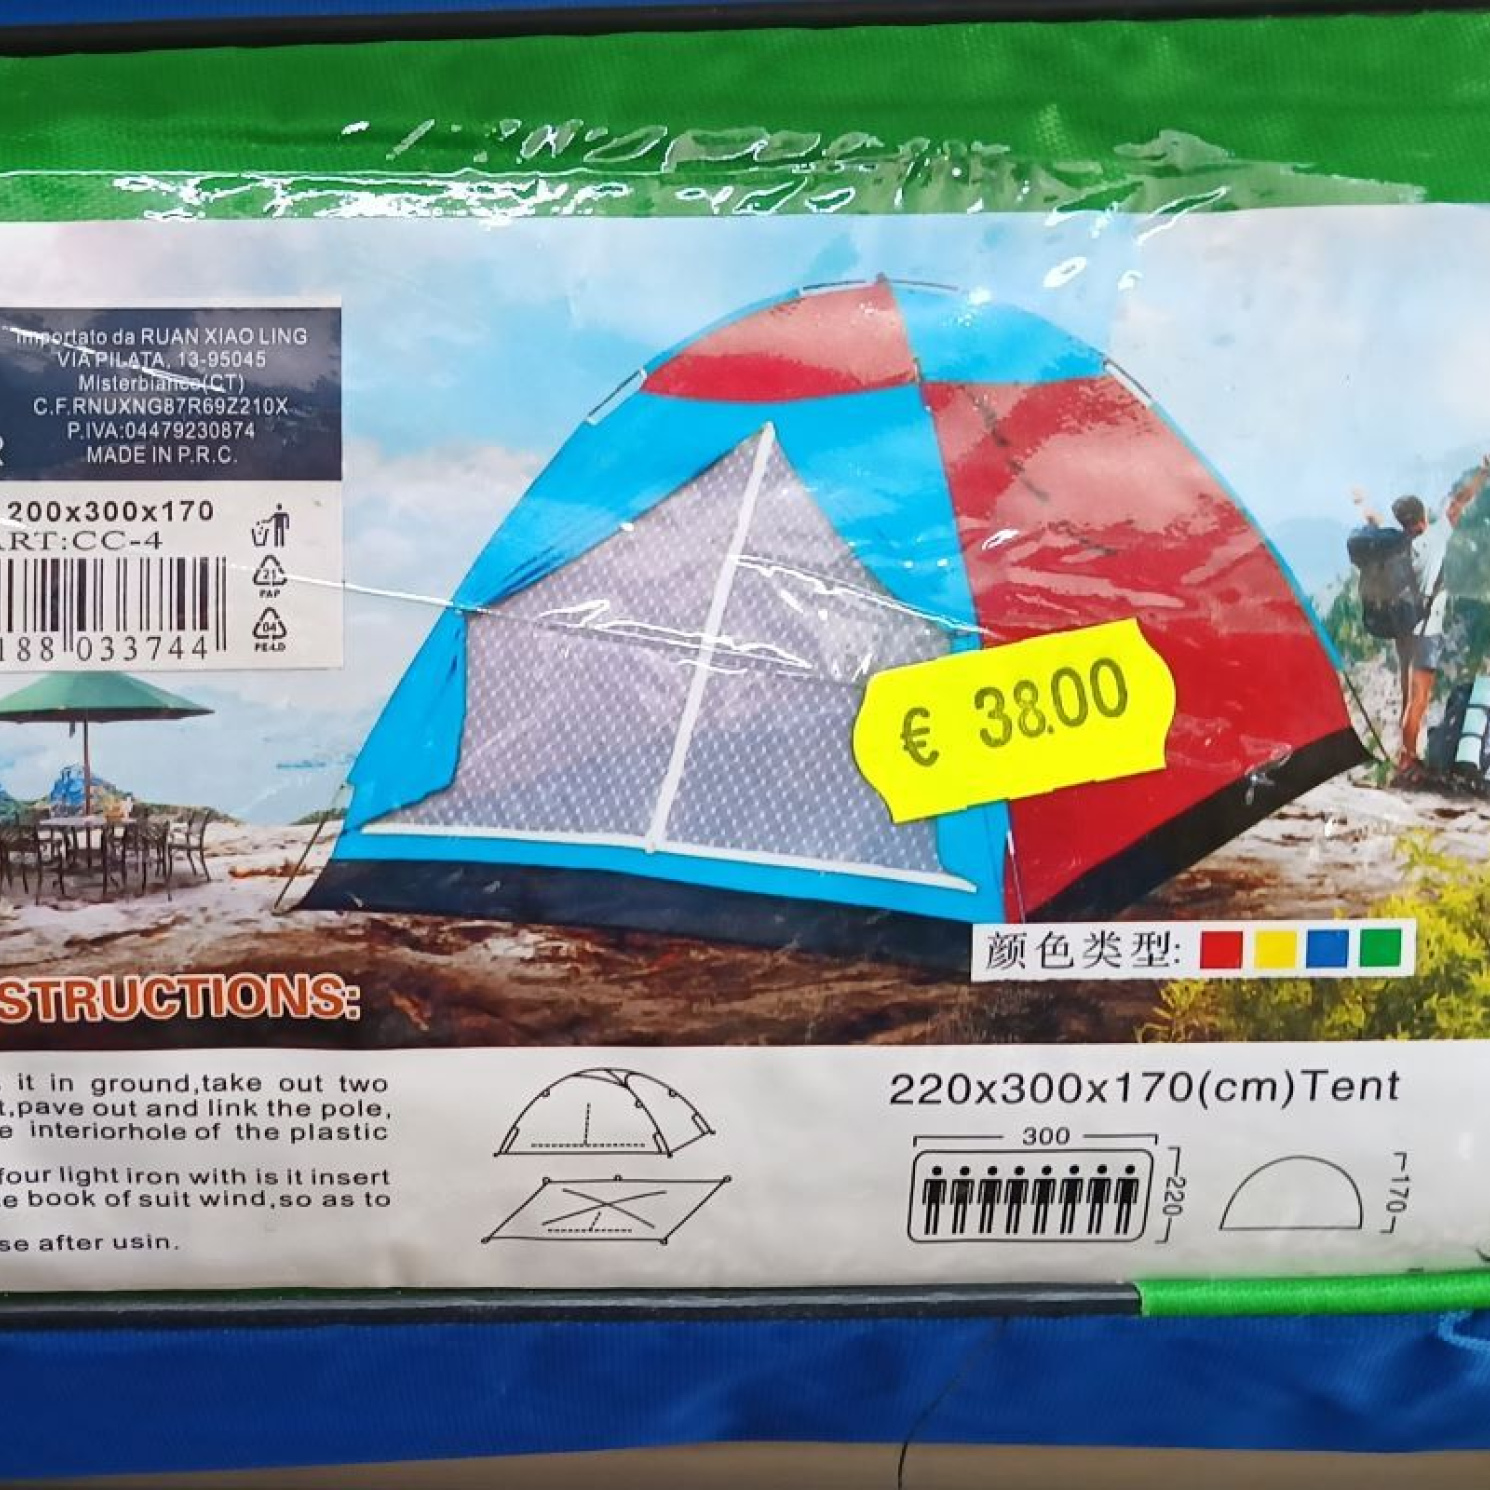 3 / 4 / 6 / 8, camping tent, waterproof, various sizes, different colors, starting price 25€